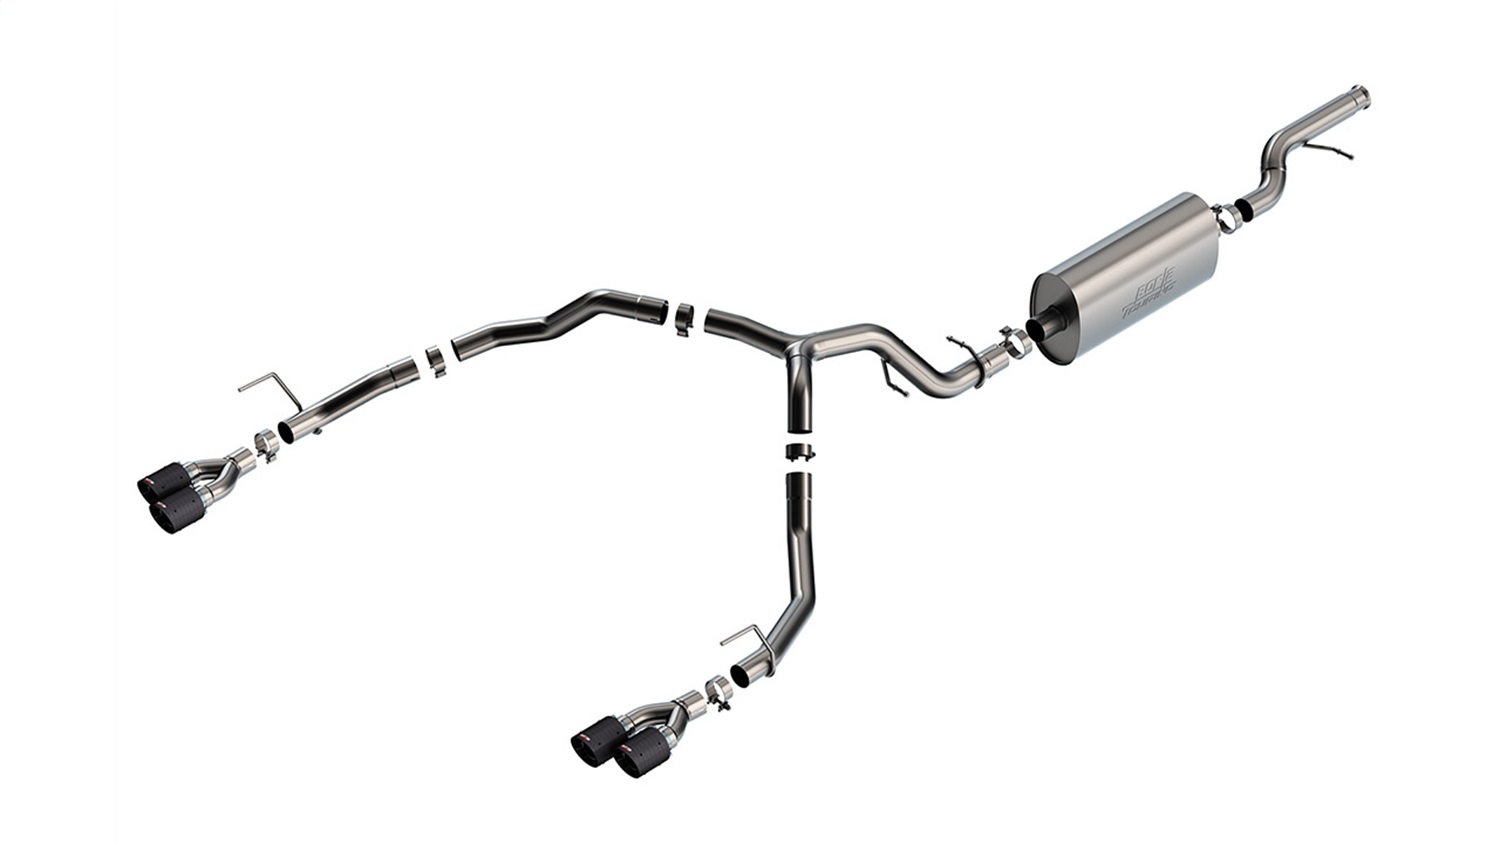 Borla 140856CF Touring Cat-Back Exhaust System Fits 21-22 Tahoe